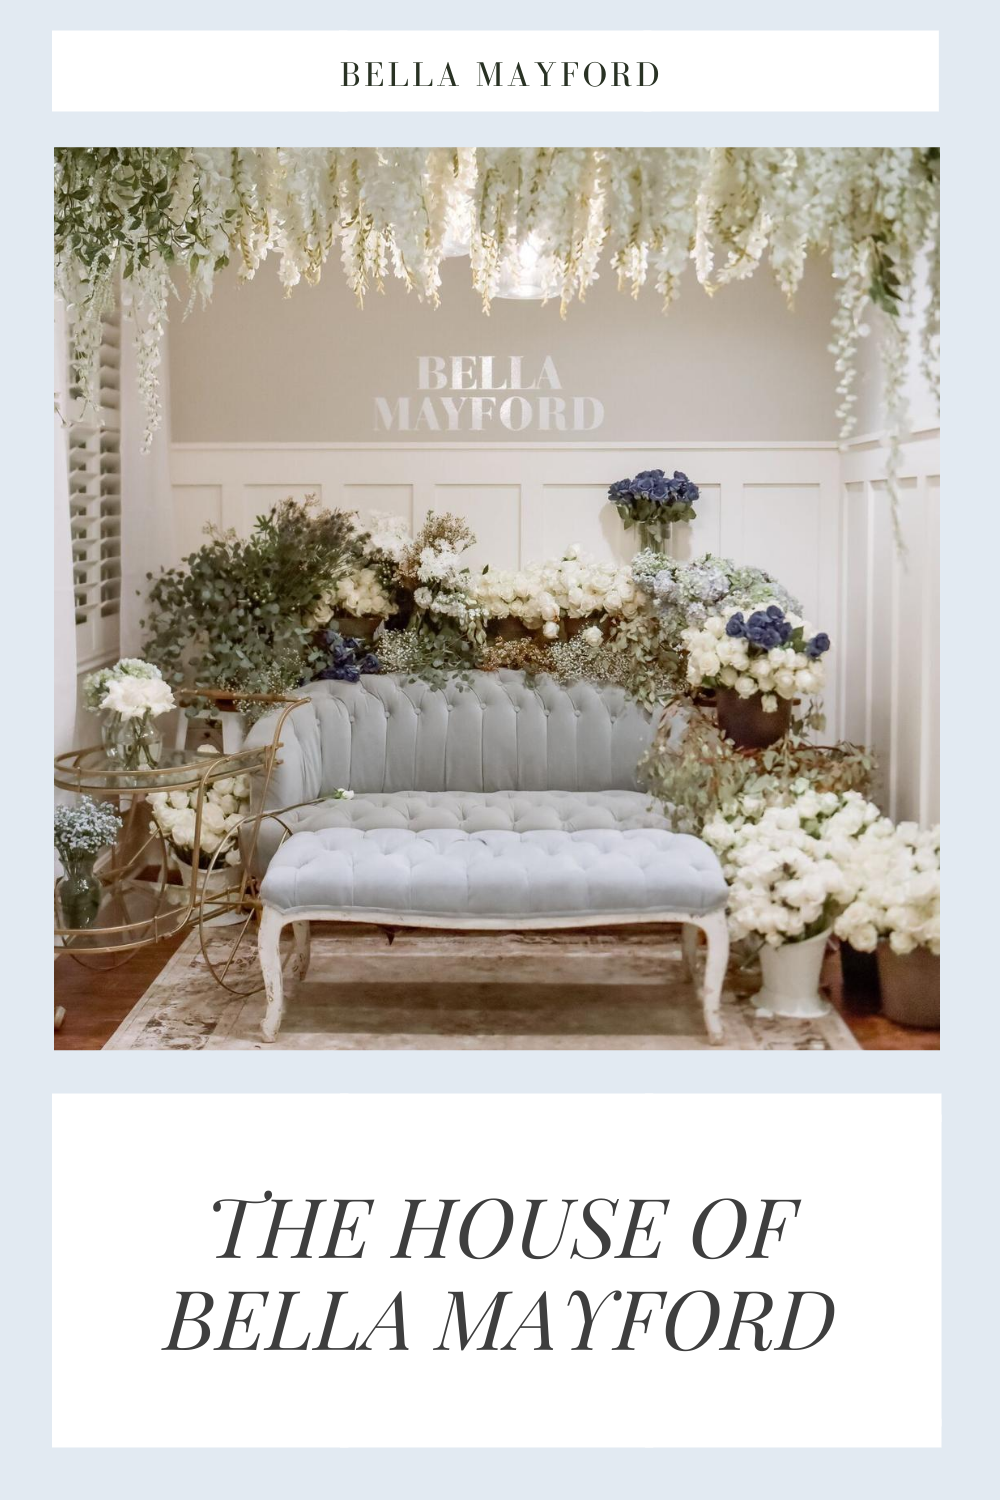 The House of Bella Mayford: Los Angeles Hosted by Damian Alexander-Du’bel